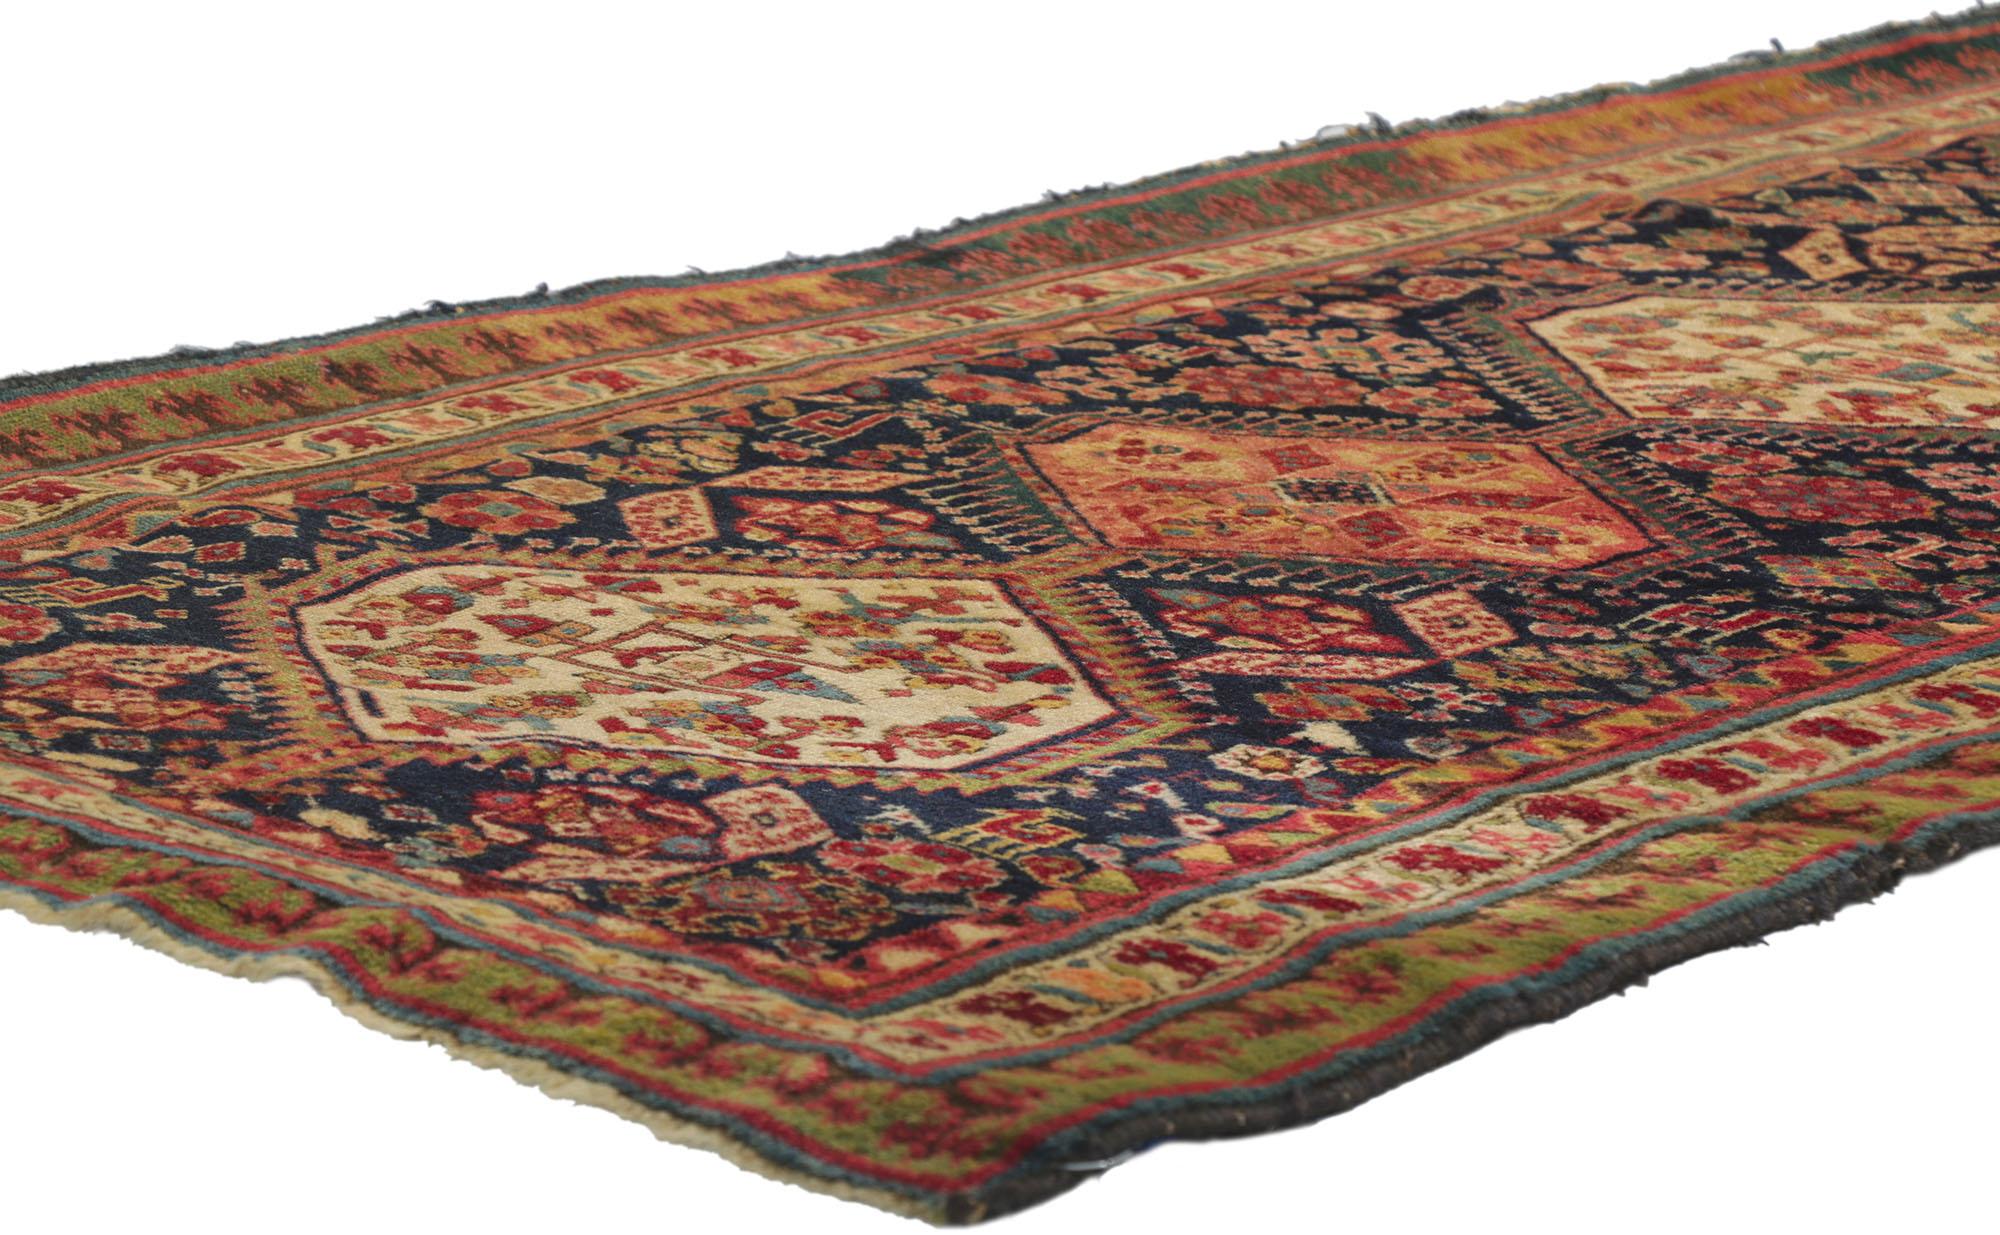 78195 antique Persian Northwest rug, 02'11 x 08'09. Rendered in variegated shades of navy blue, brick red, rust, green, sky blue, beige, berry, tan, cerulean, and pink with other accent colors. Desirable Age Wear. Abrash. Hand-knotted wool. Made in